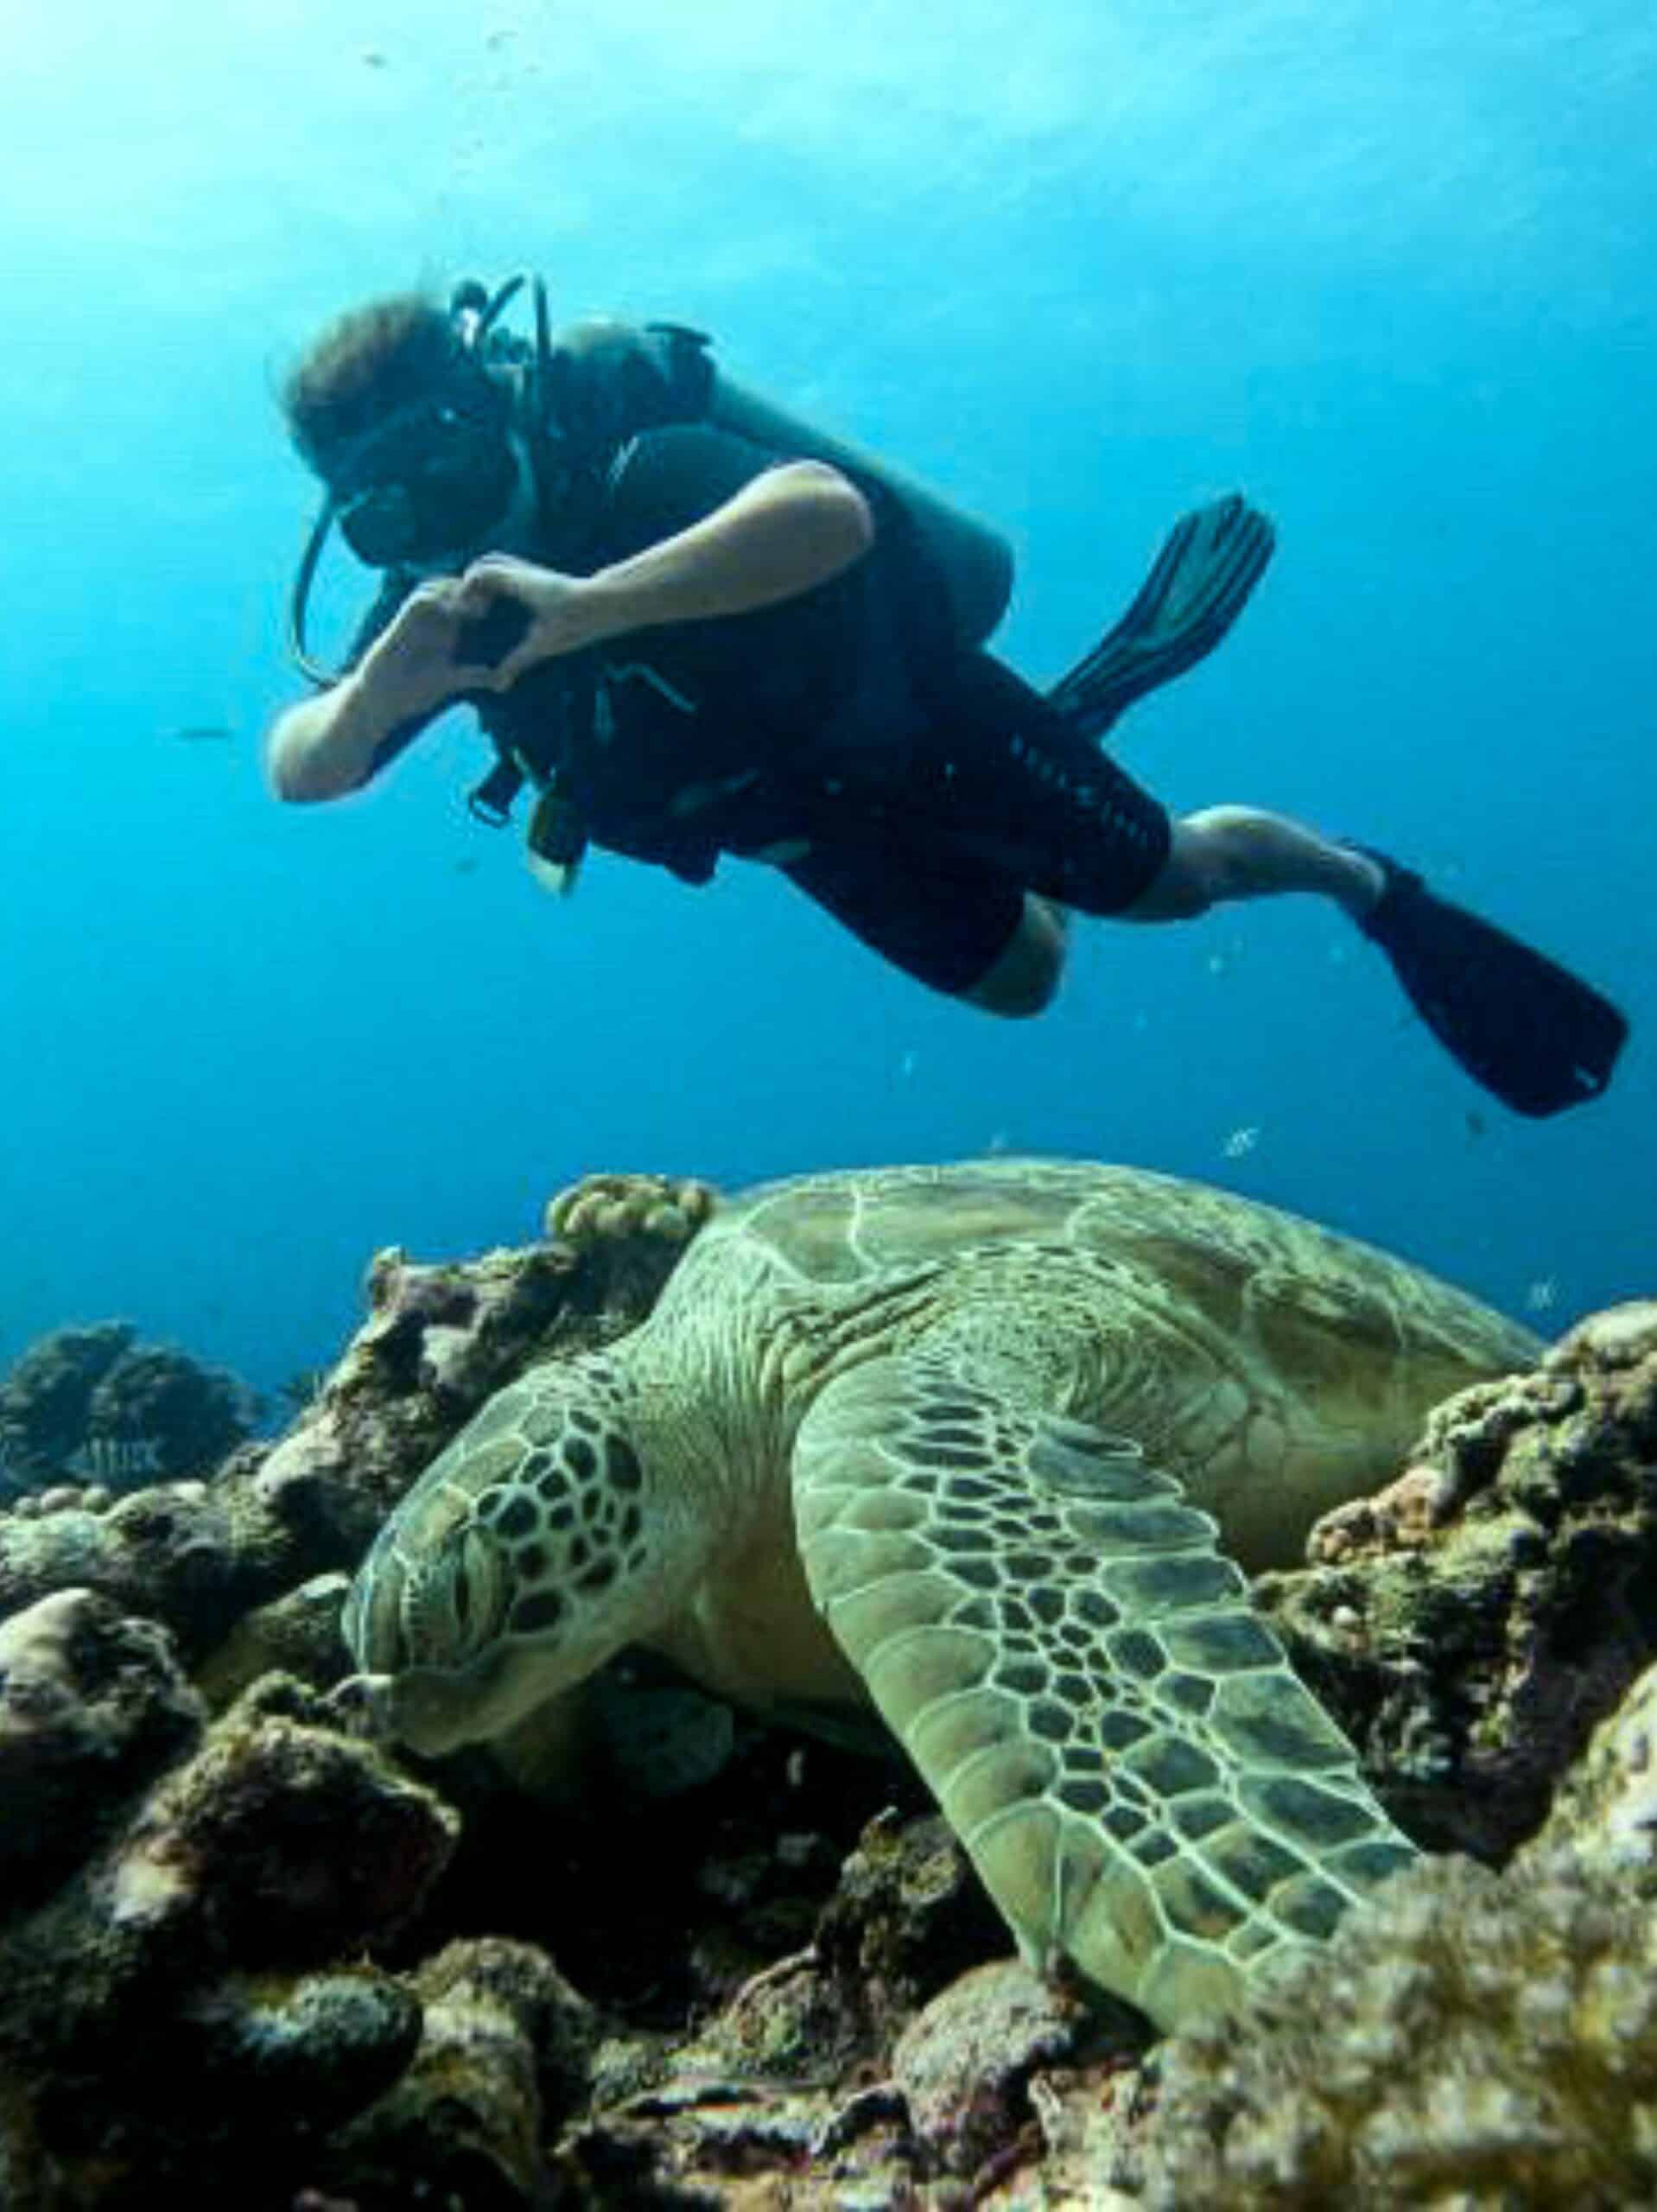 Scuba diving with a massive green sea turtle – an awesome activity in Gili Trawangan for solo travelers